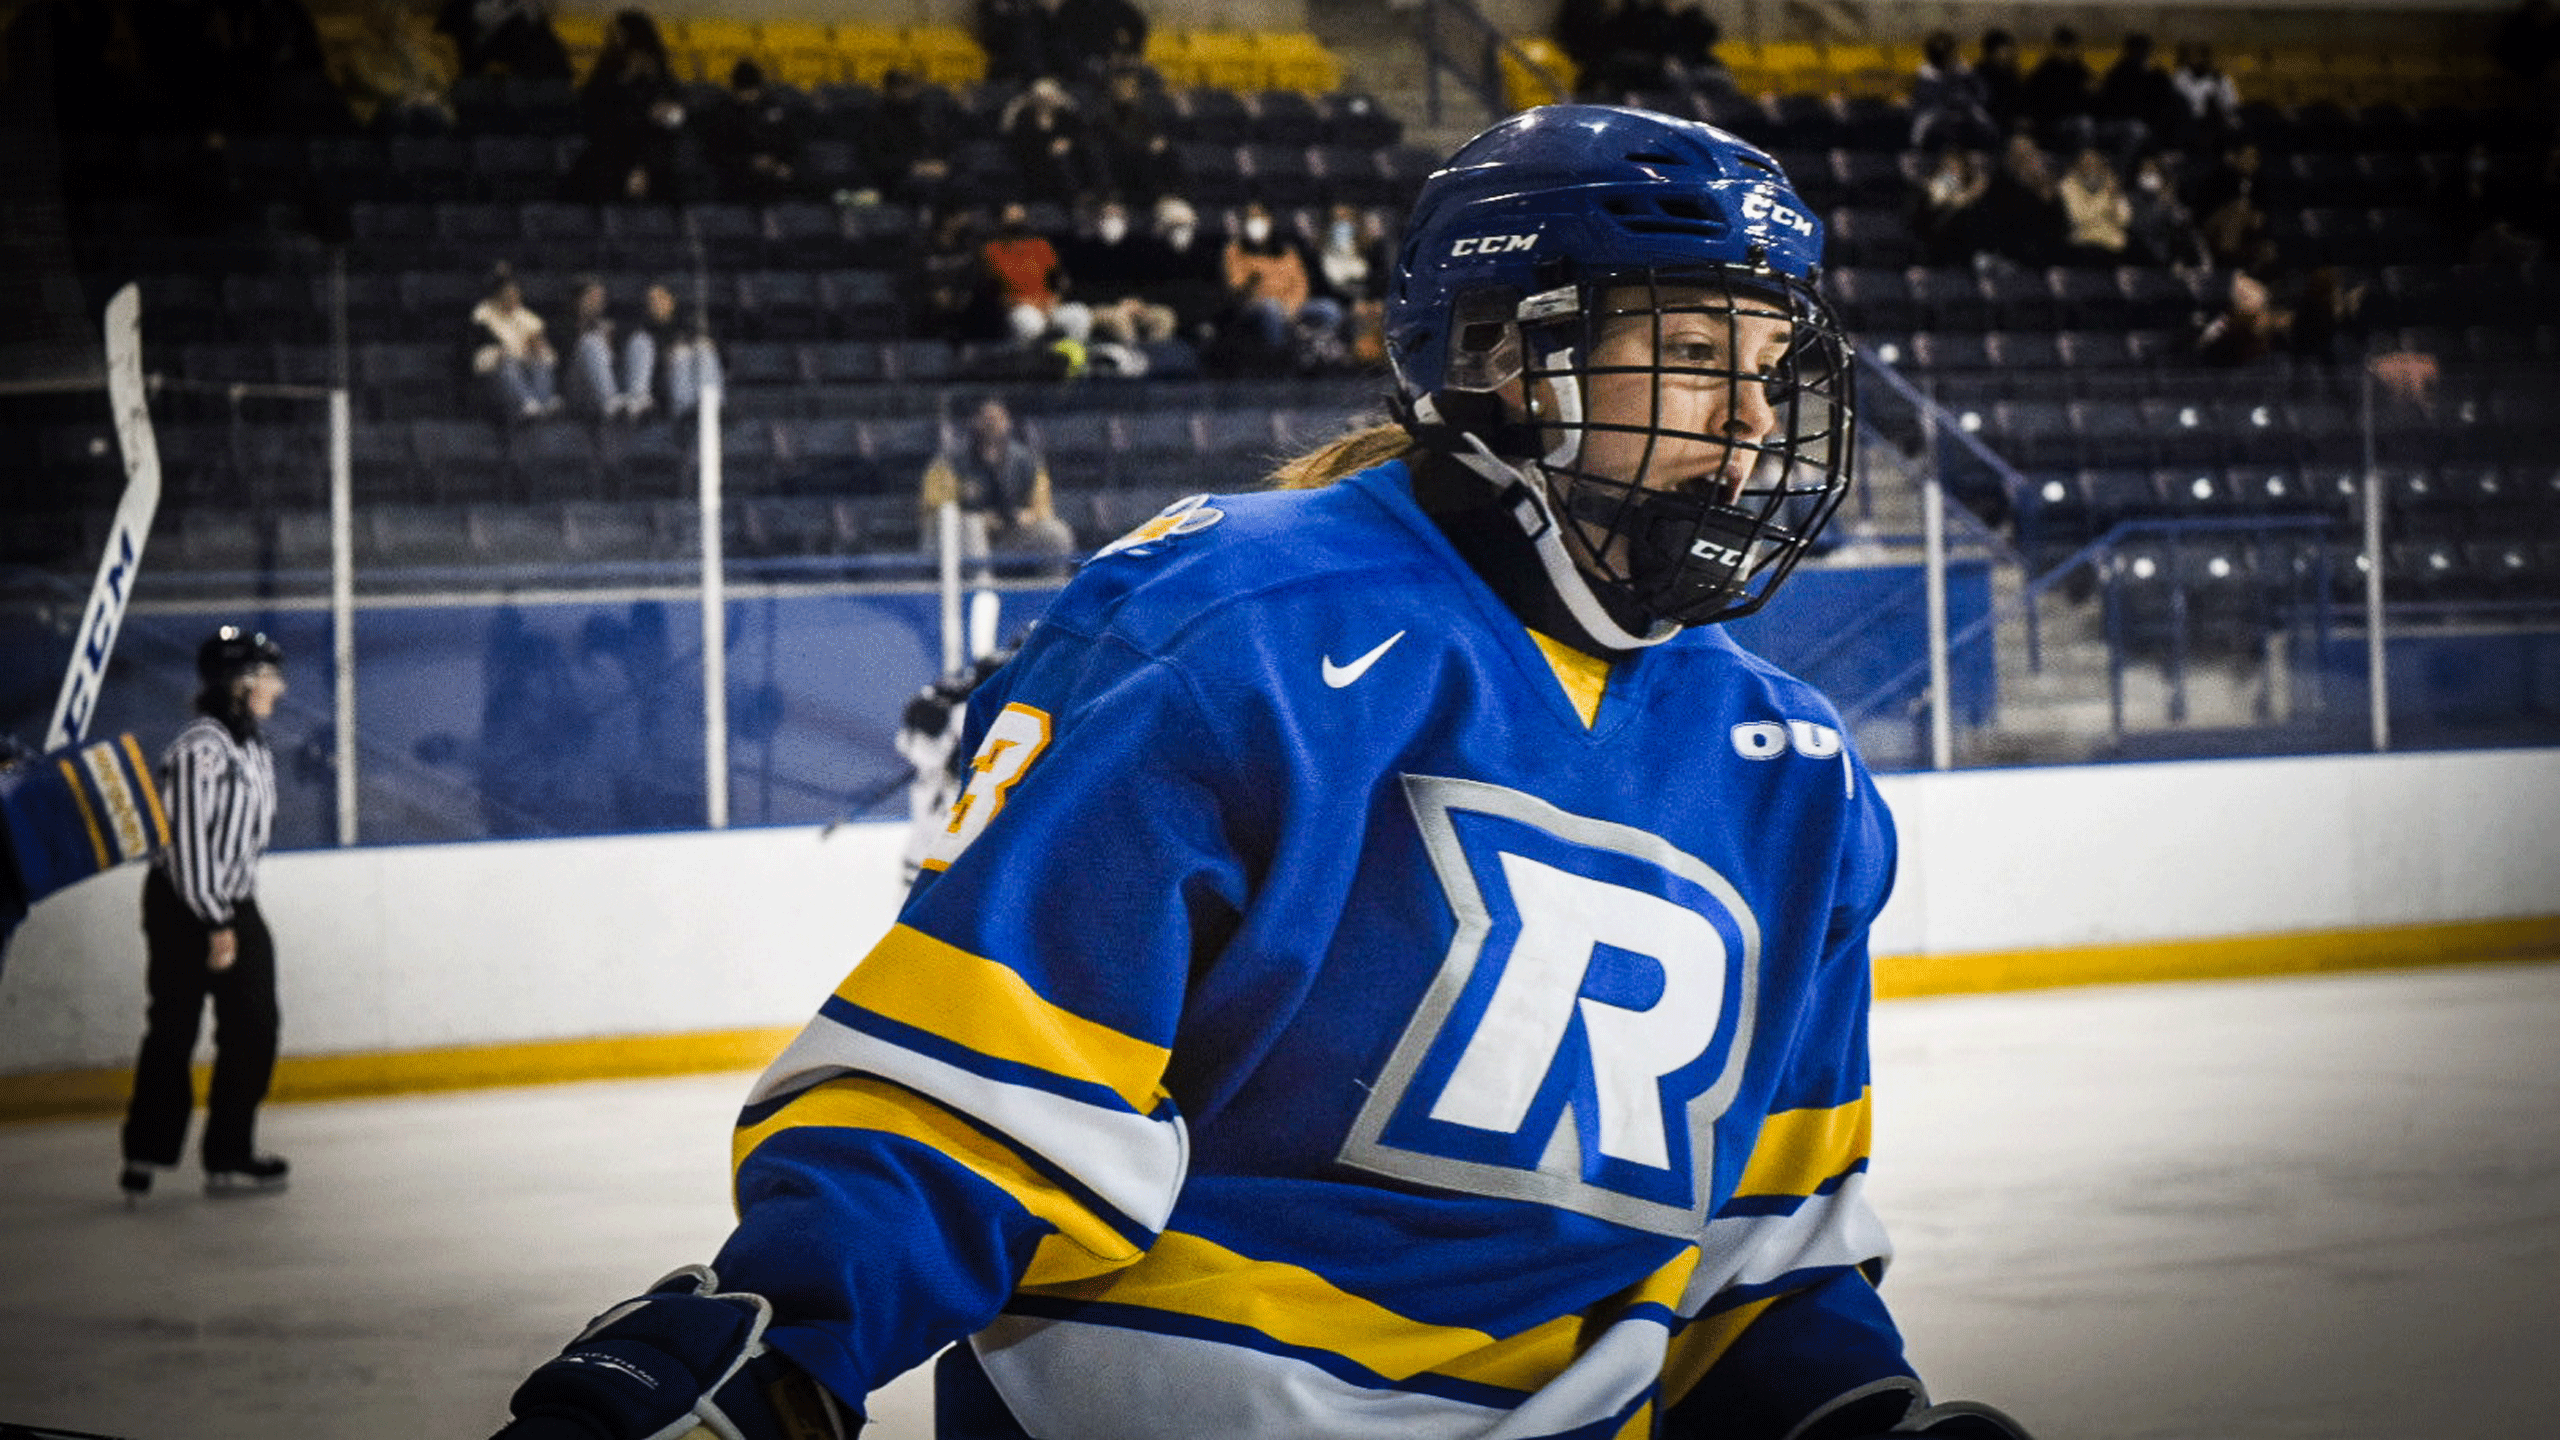 A Rams women's hockey player in a blue jersey skates by the glass